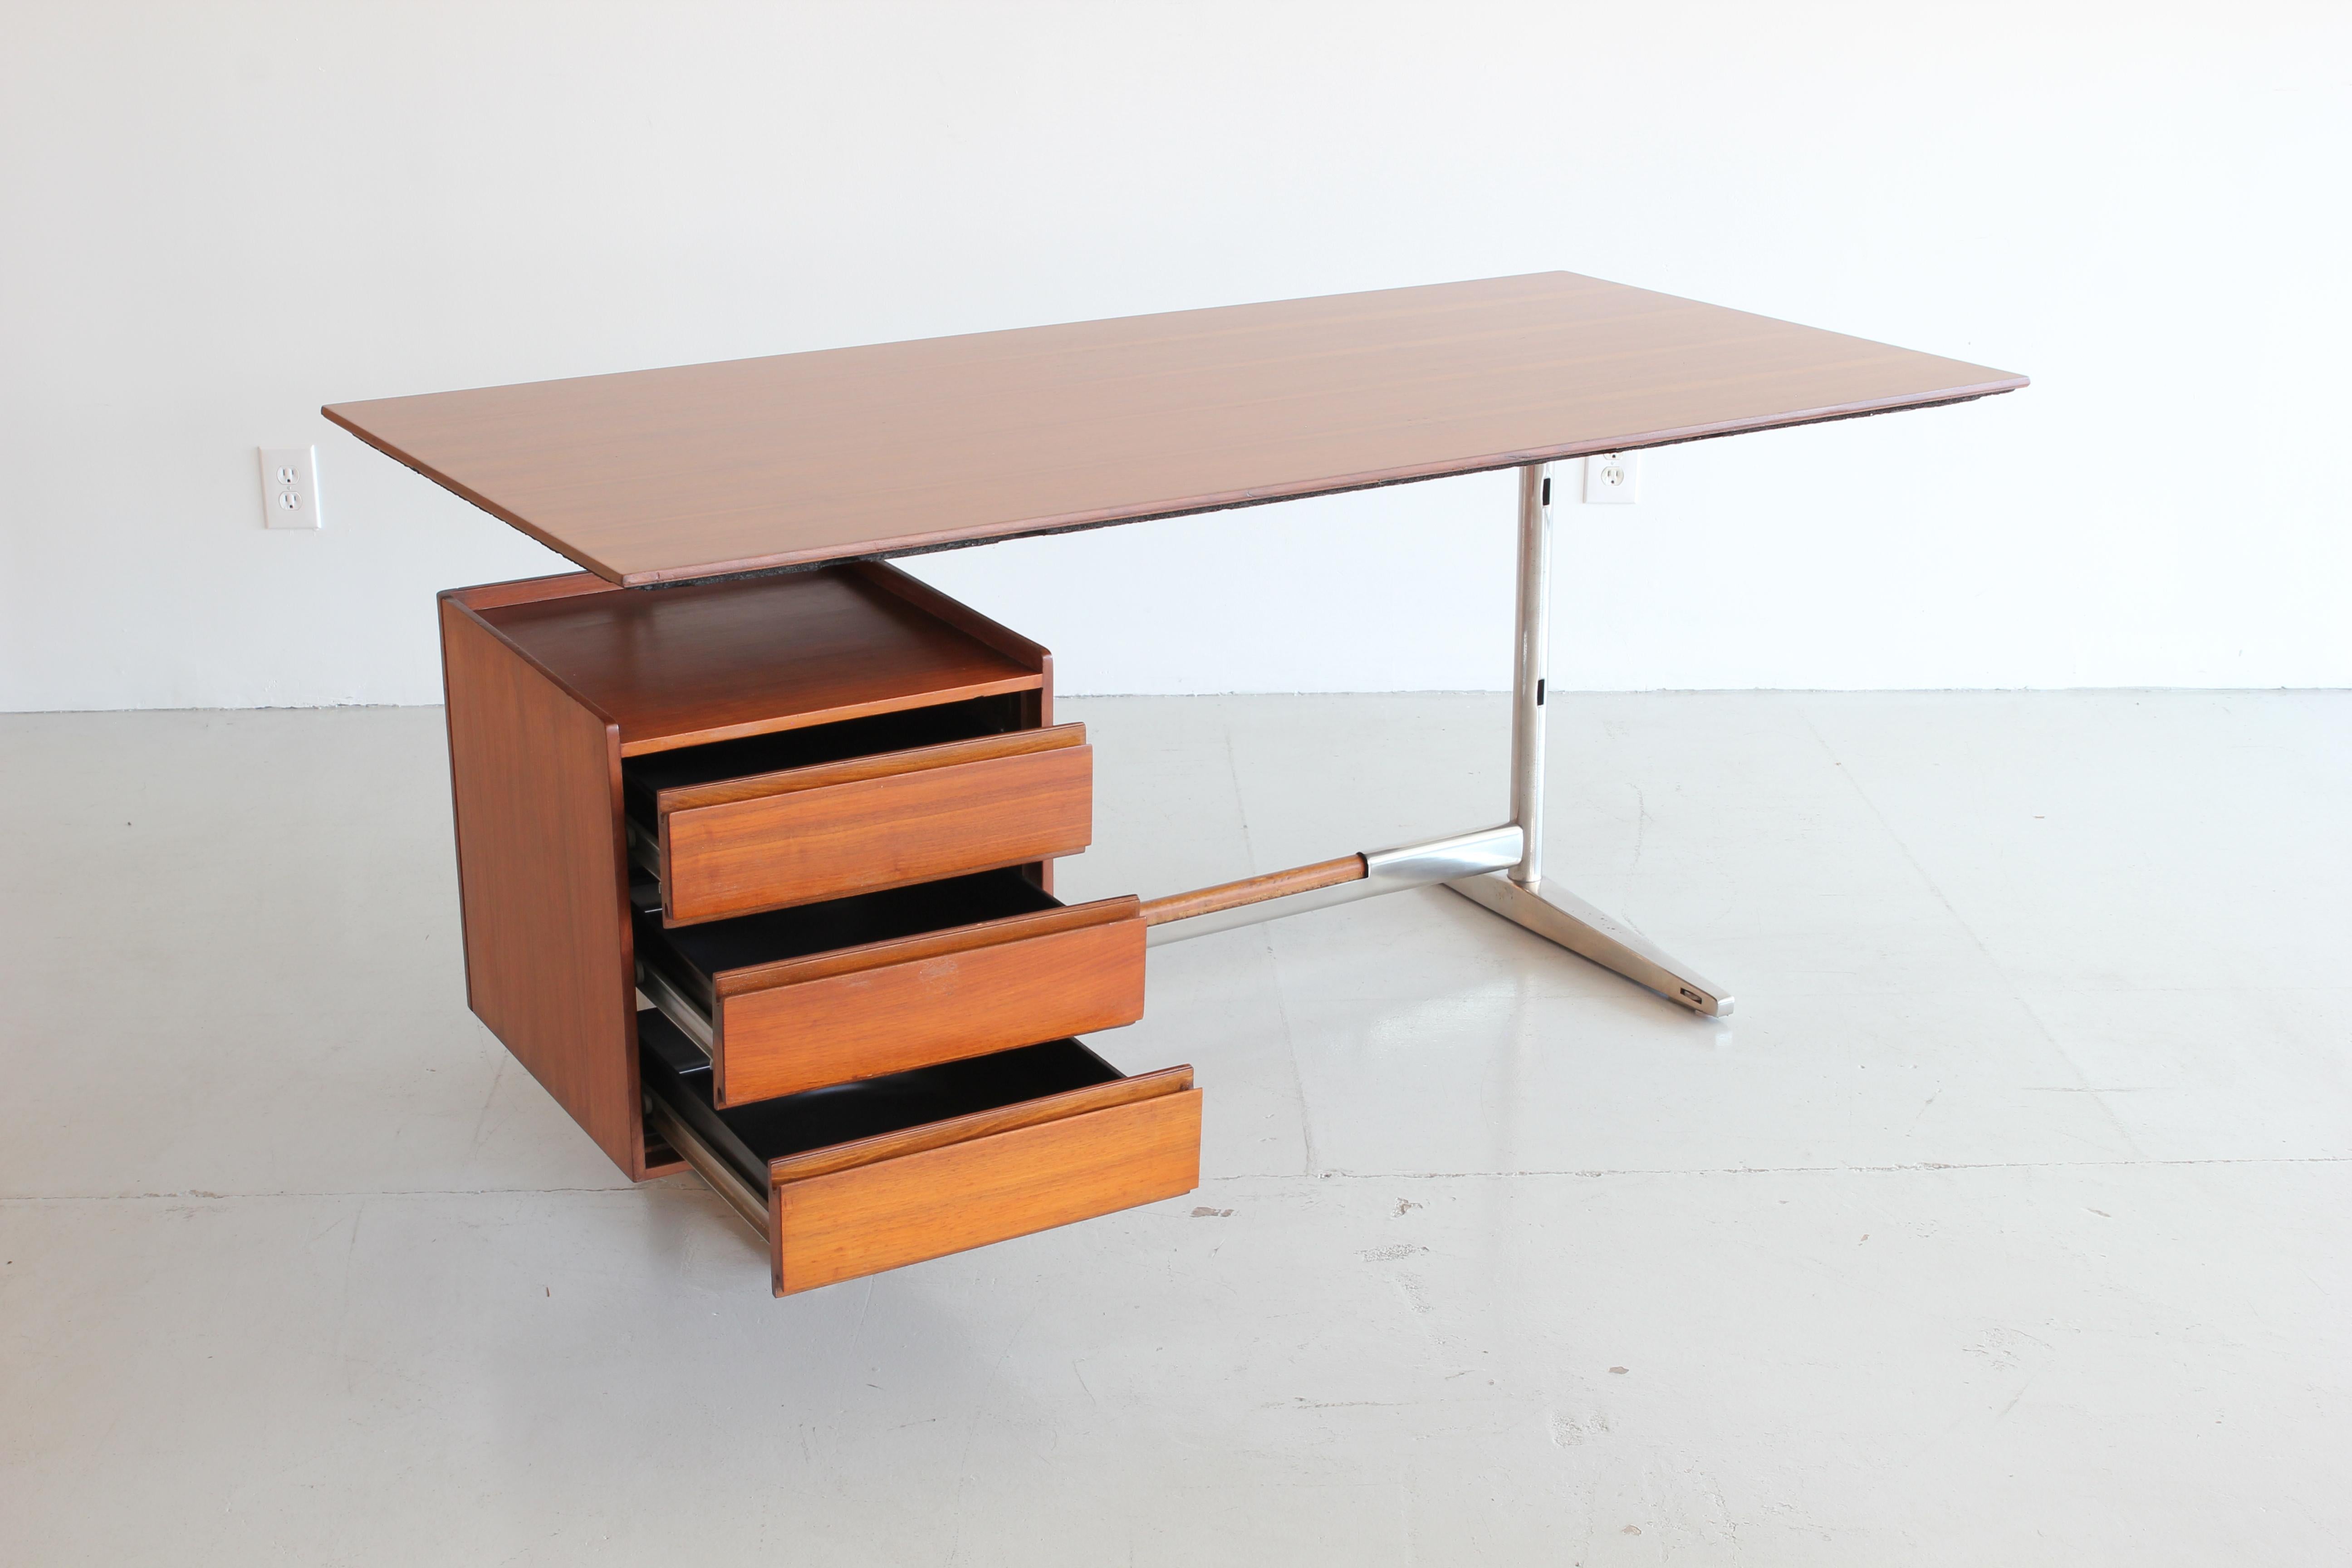 Sleek administrative style desk in metal and rosewood designed for the Pirelli skyscraper, Rima production, 1960. Rima Inciso brand. Beautiful details throughout.